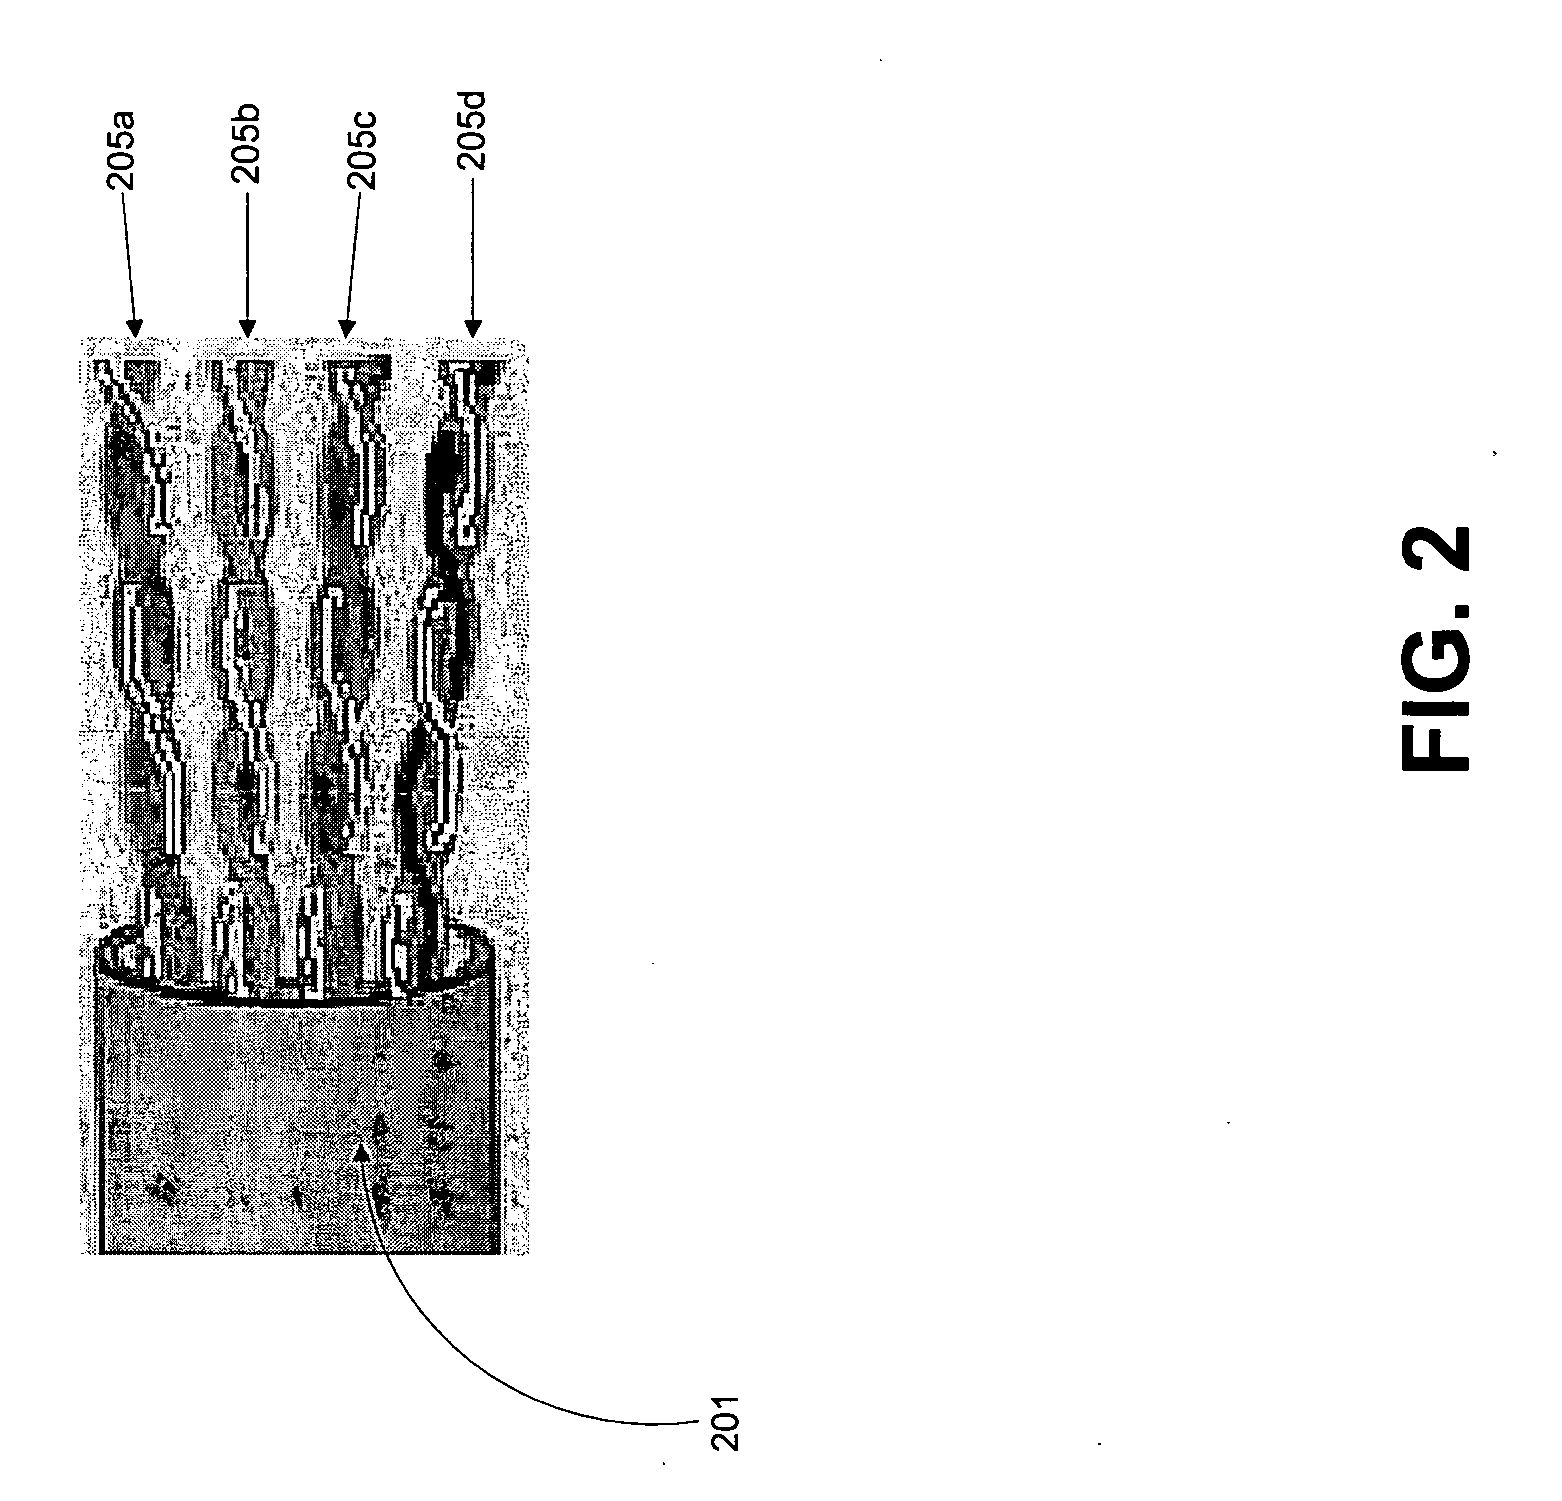 Method and apparatus for video signal skew compensation